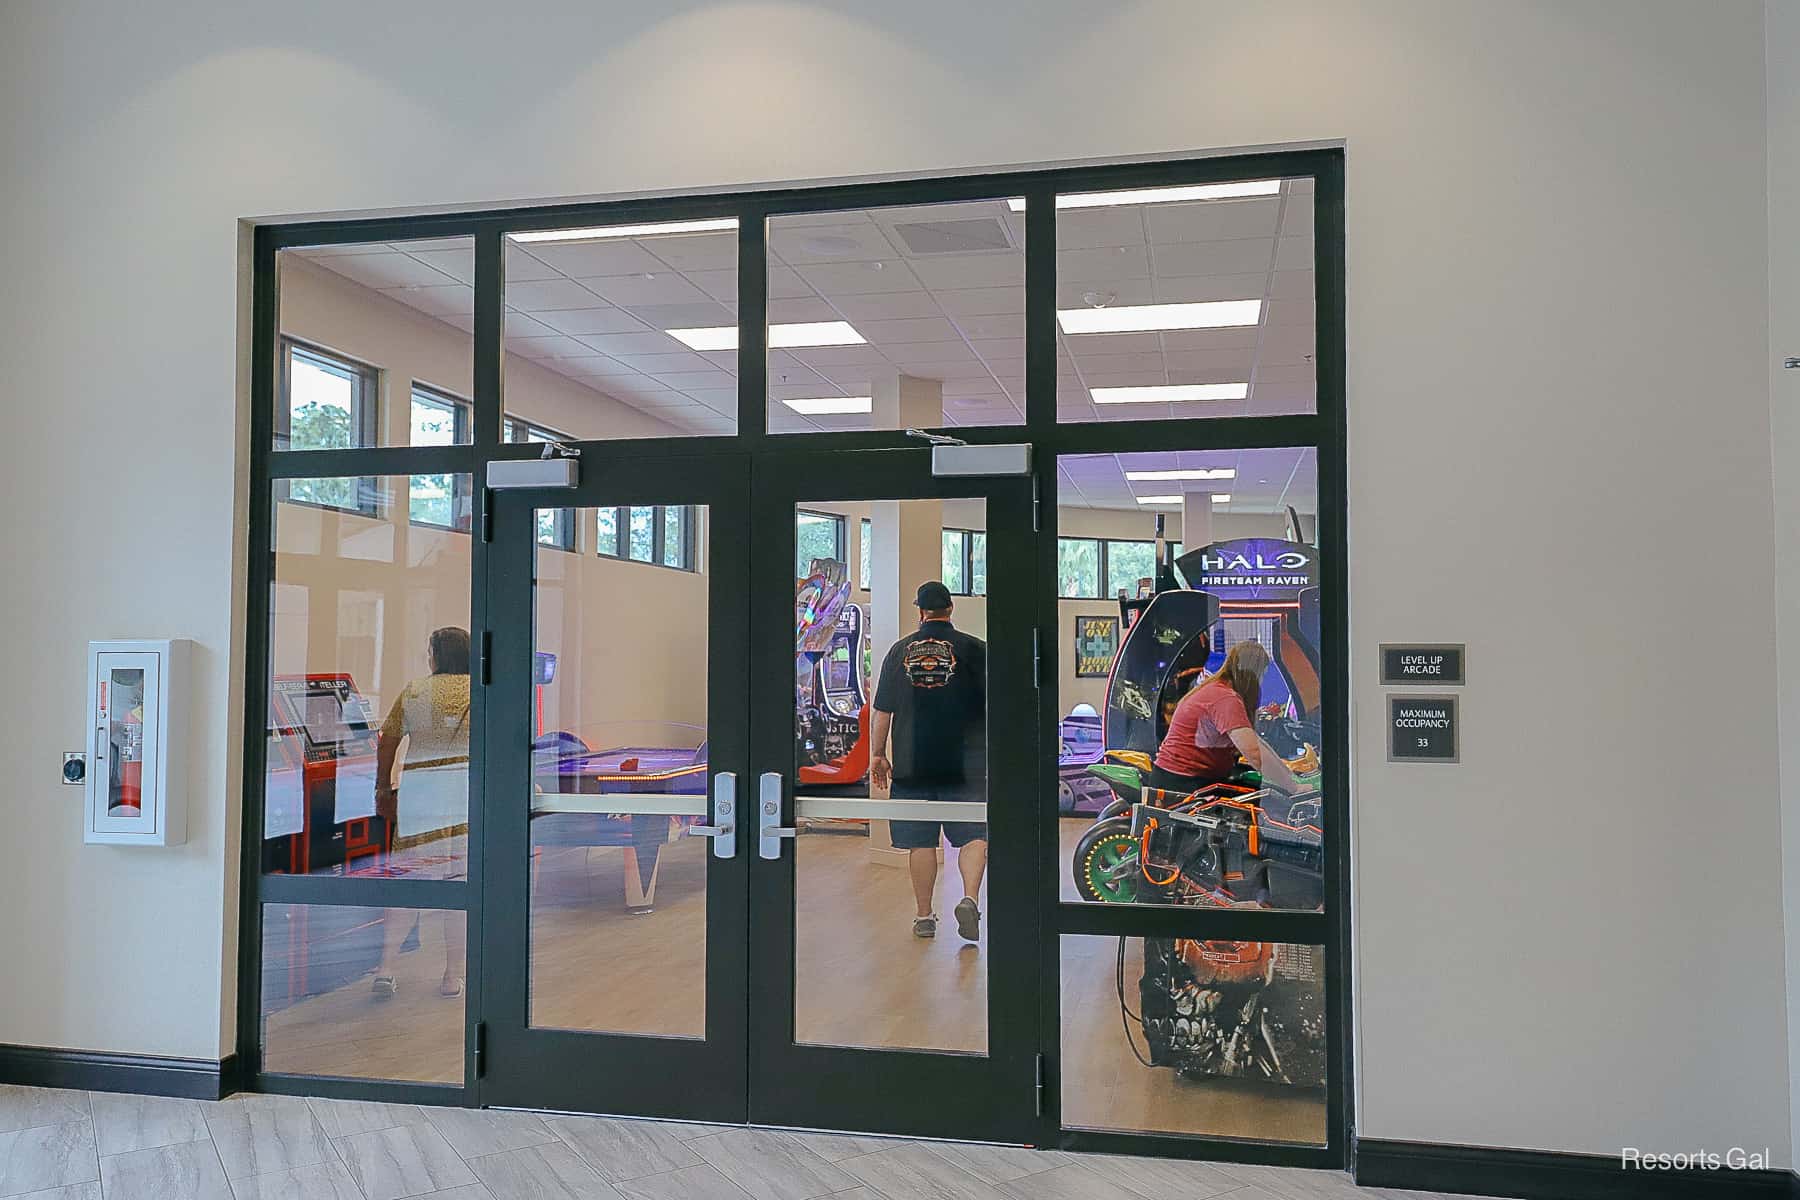 A pair of glass doors opens up to a busy arcade with people playing games. 